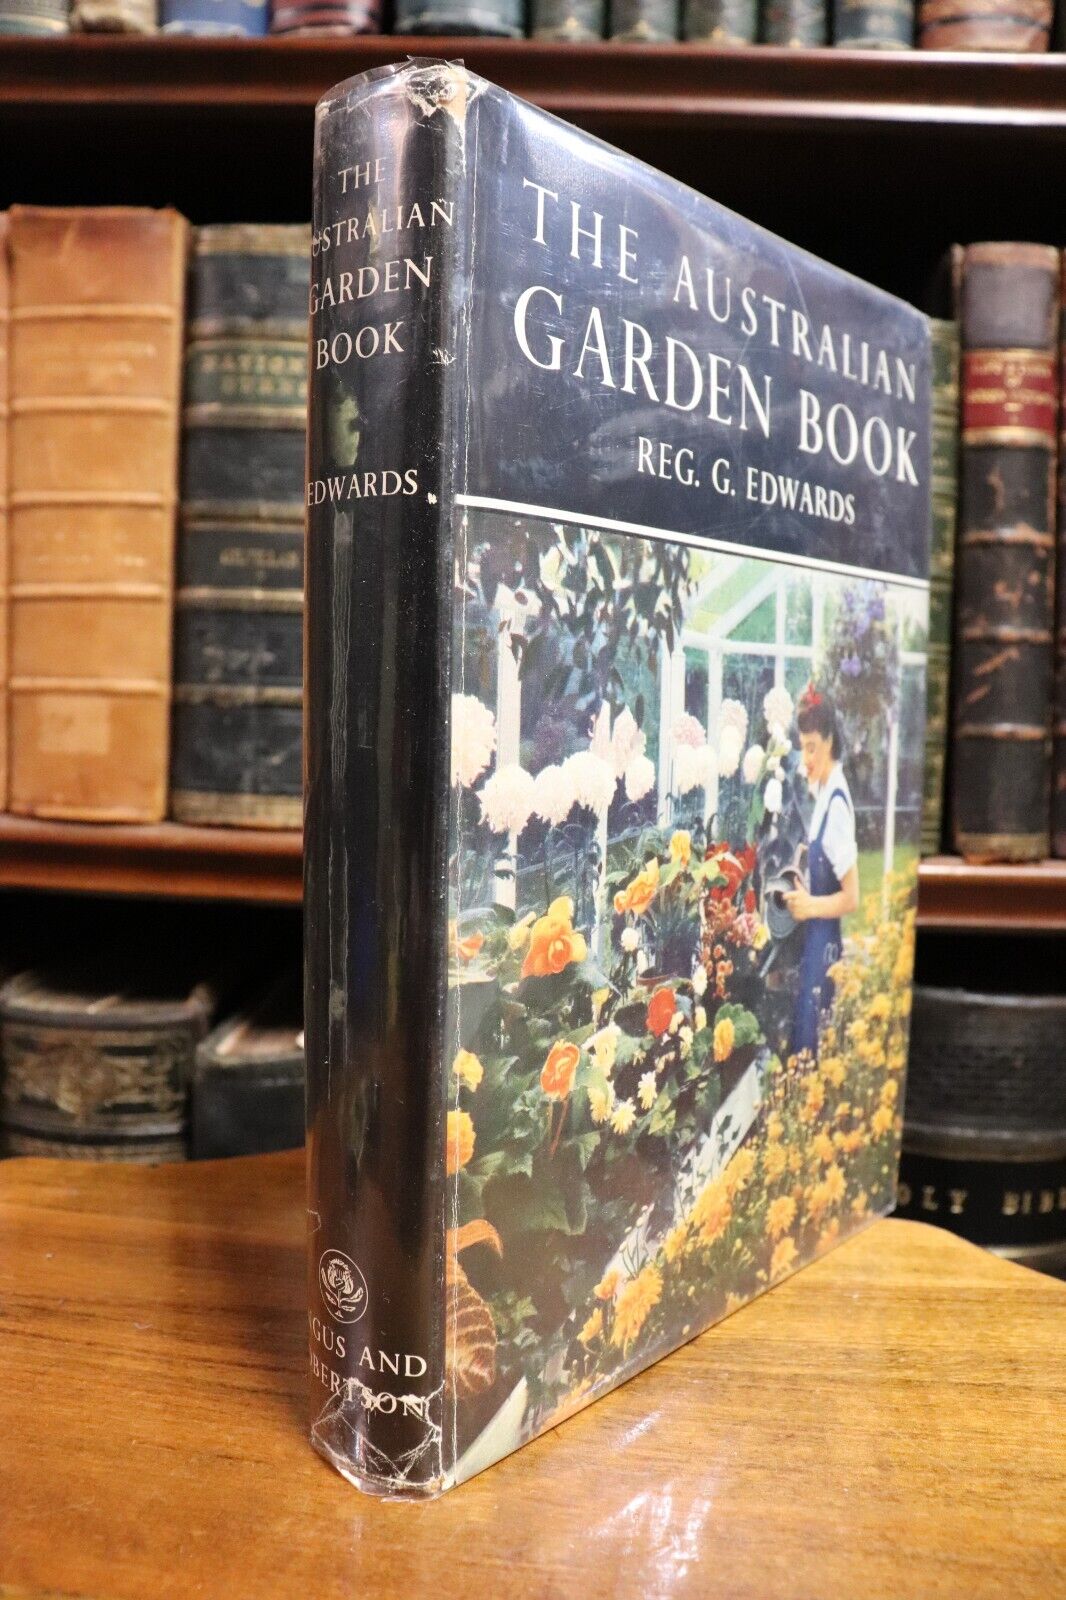 The Australian Garden Book by RG Edwards - 1958 - Gardening Reference Book - 0